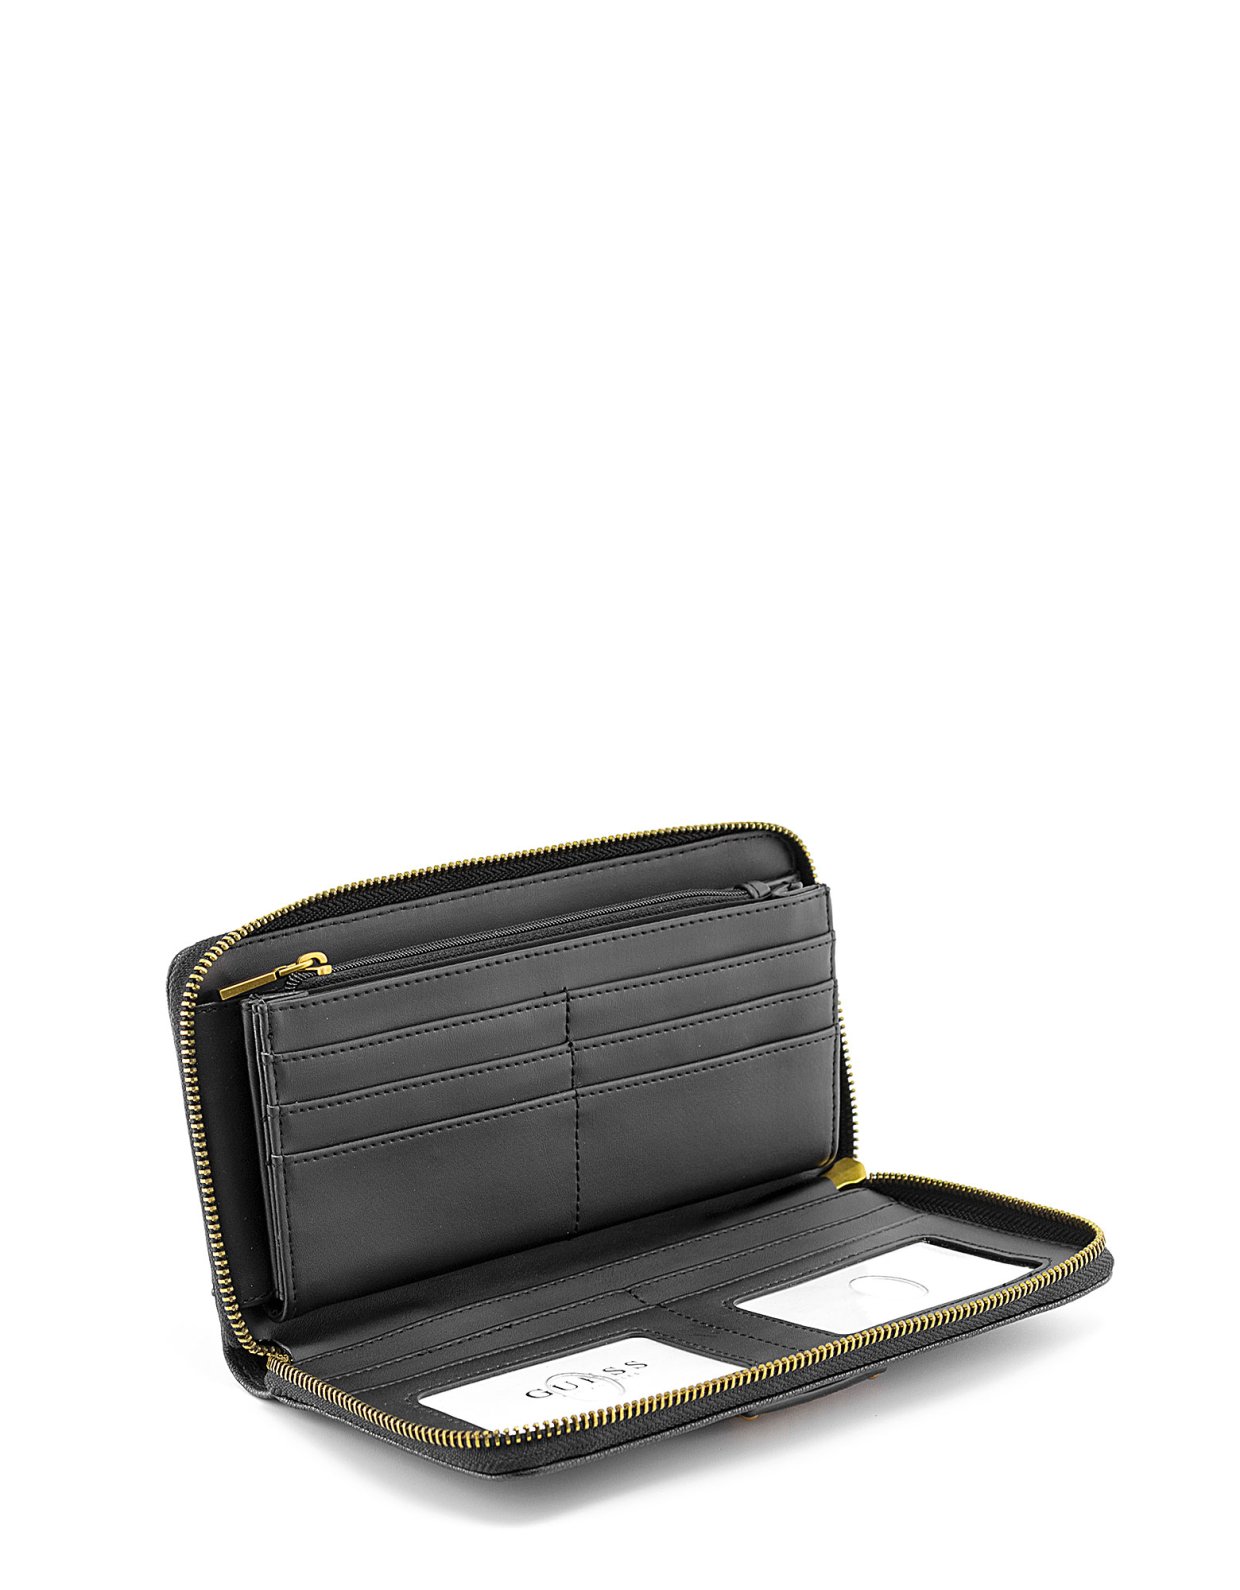 Guess Centre stage maxi wallet black